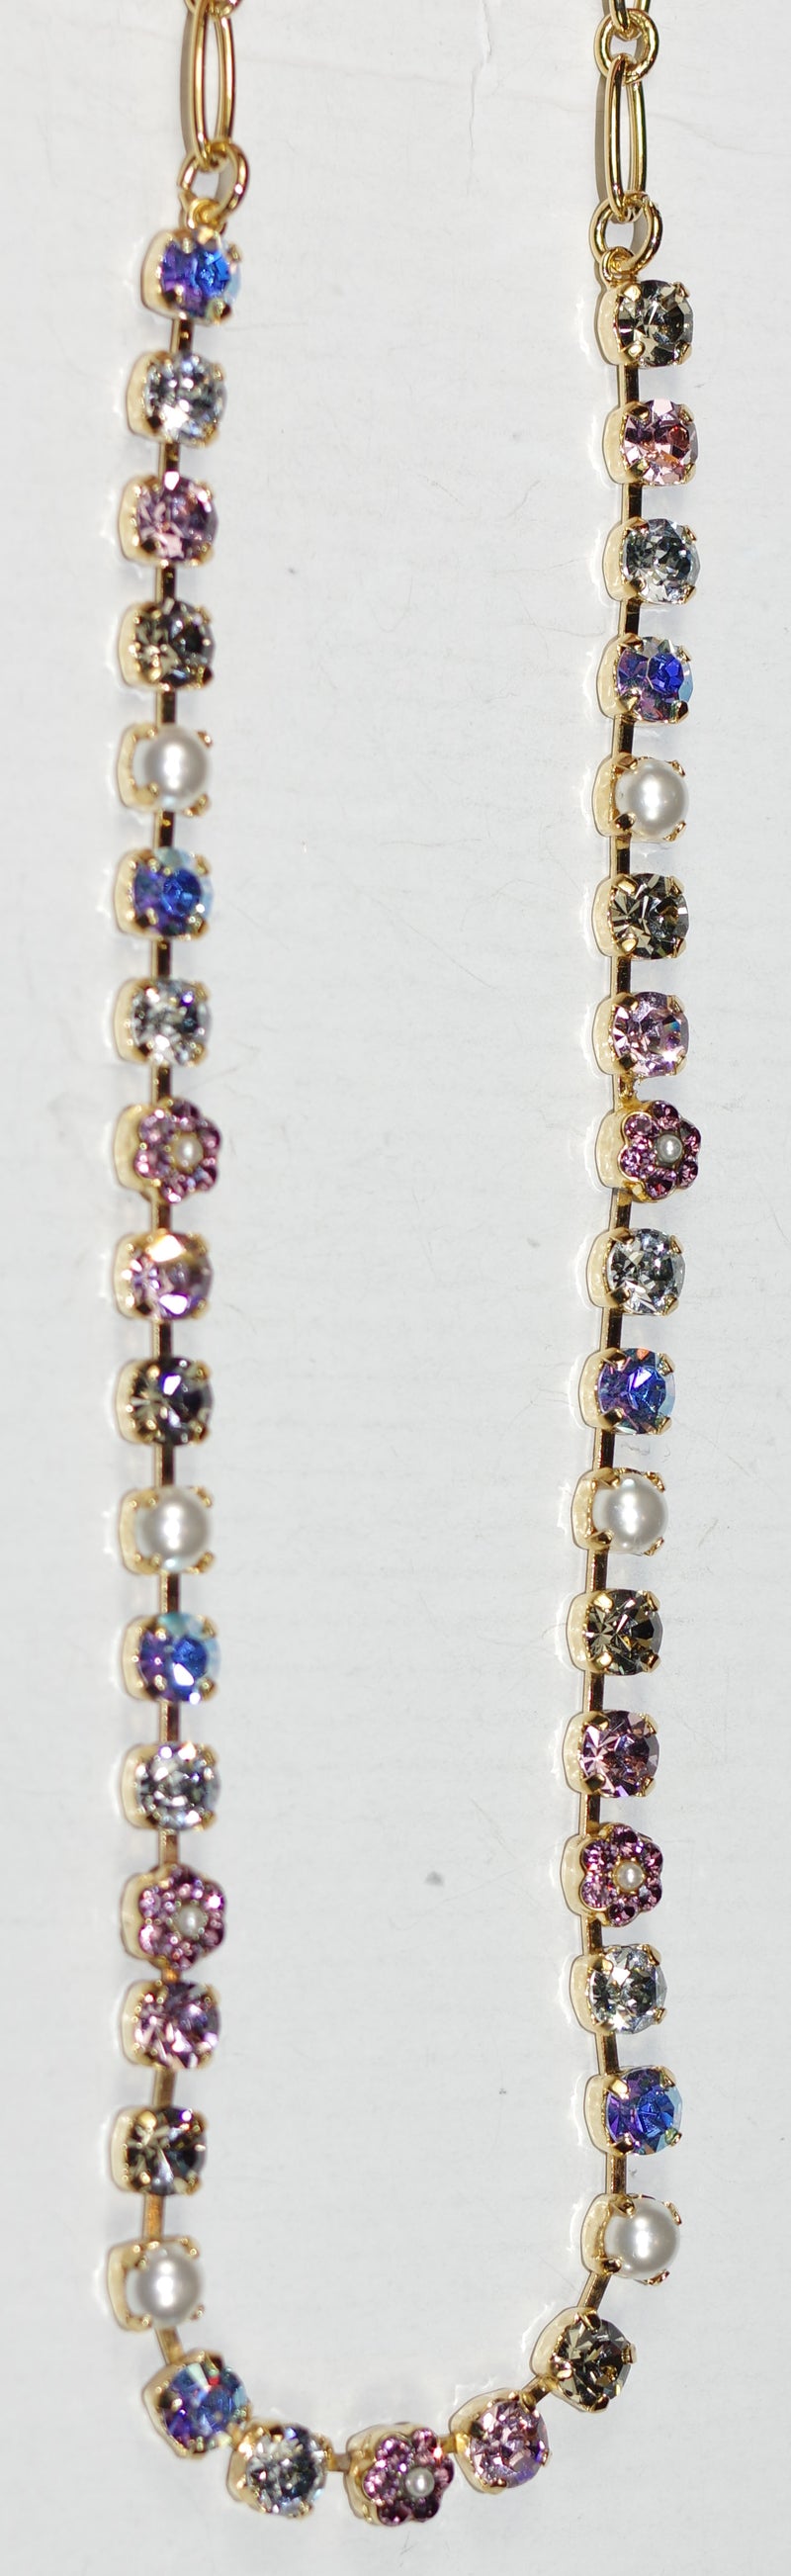 MARIANA NECKLACE CAKE BATTER: pearl, blue, pink, grey 1/4" stones in yellow gold setting, 18" adjustable chain